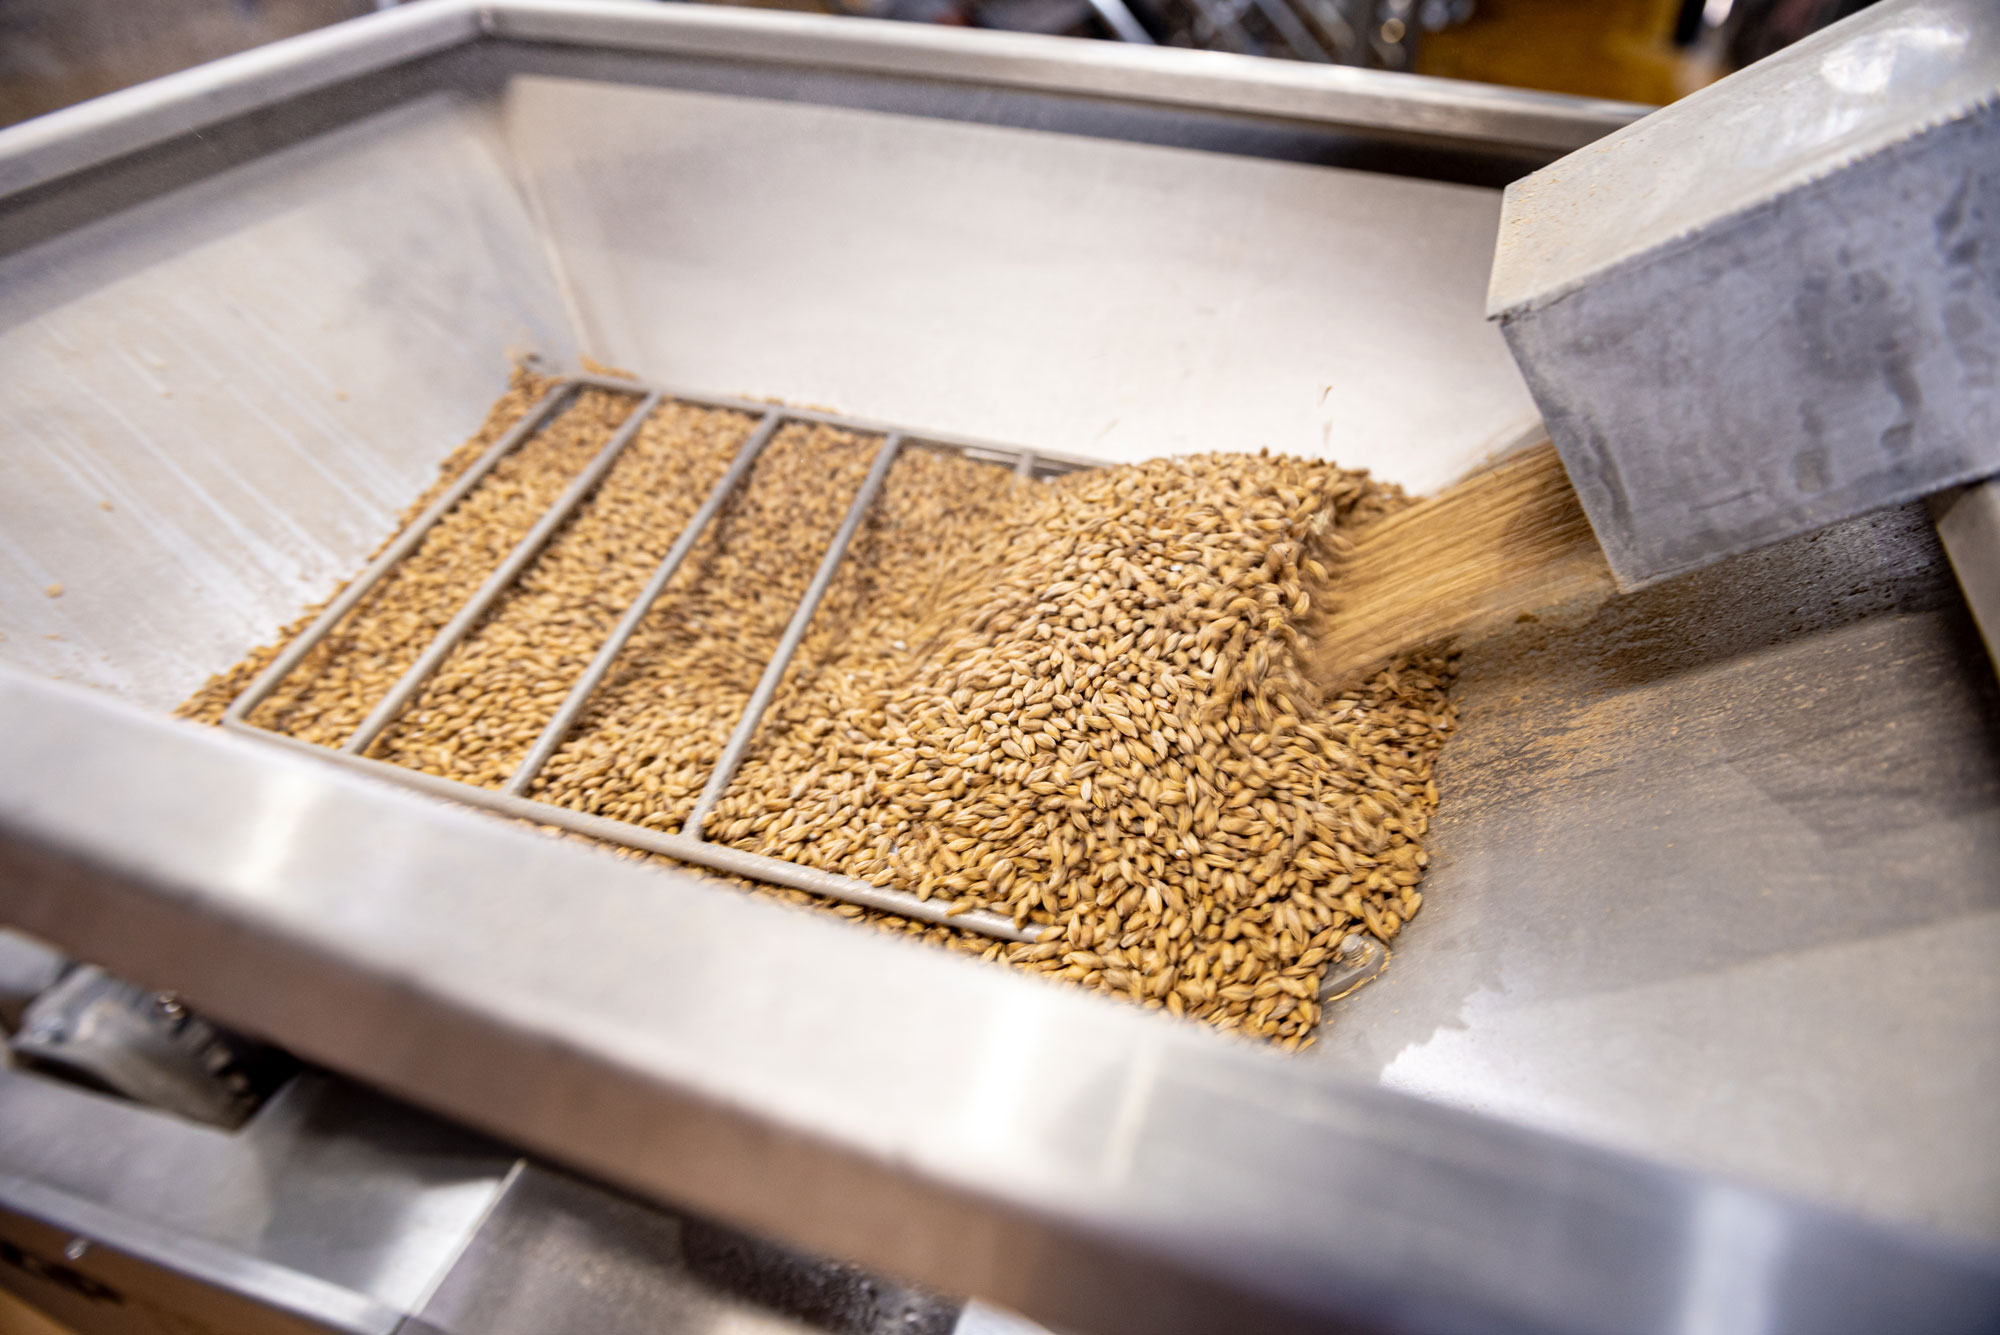 Grains being produced within a manufacturing plant